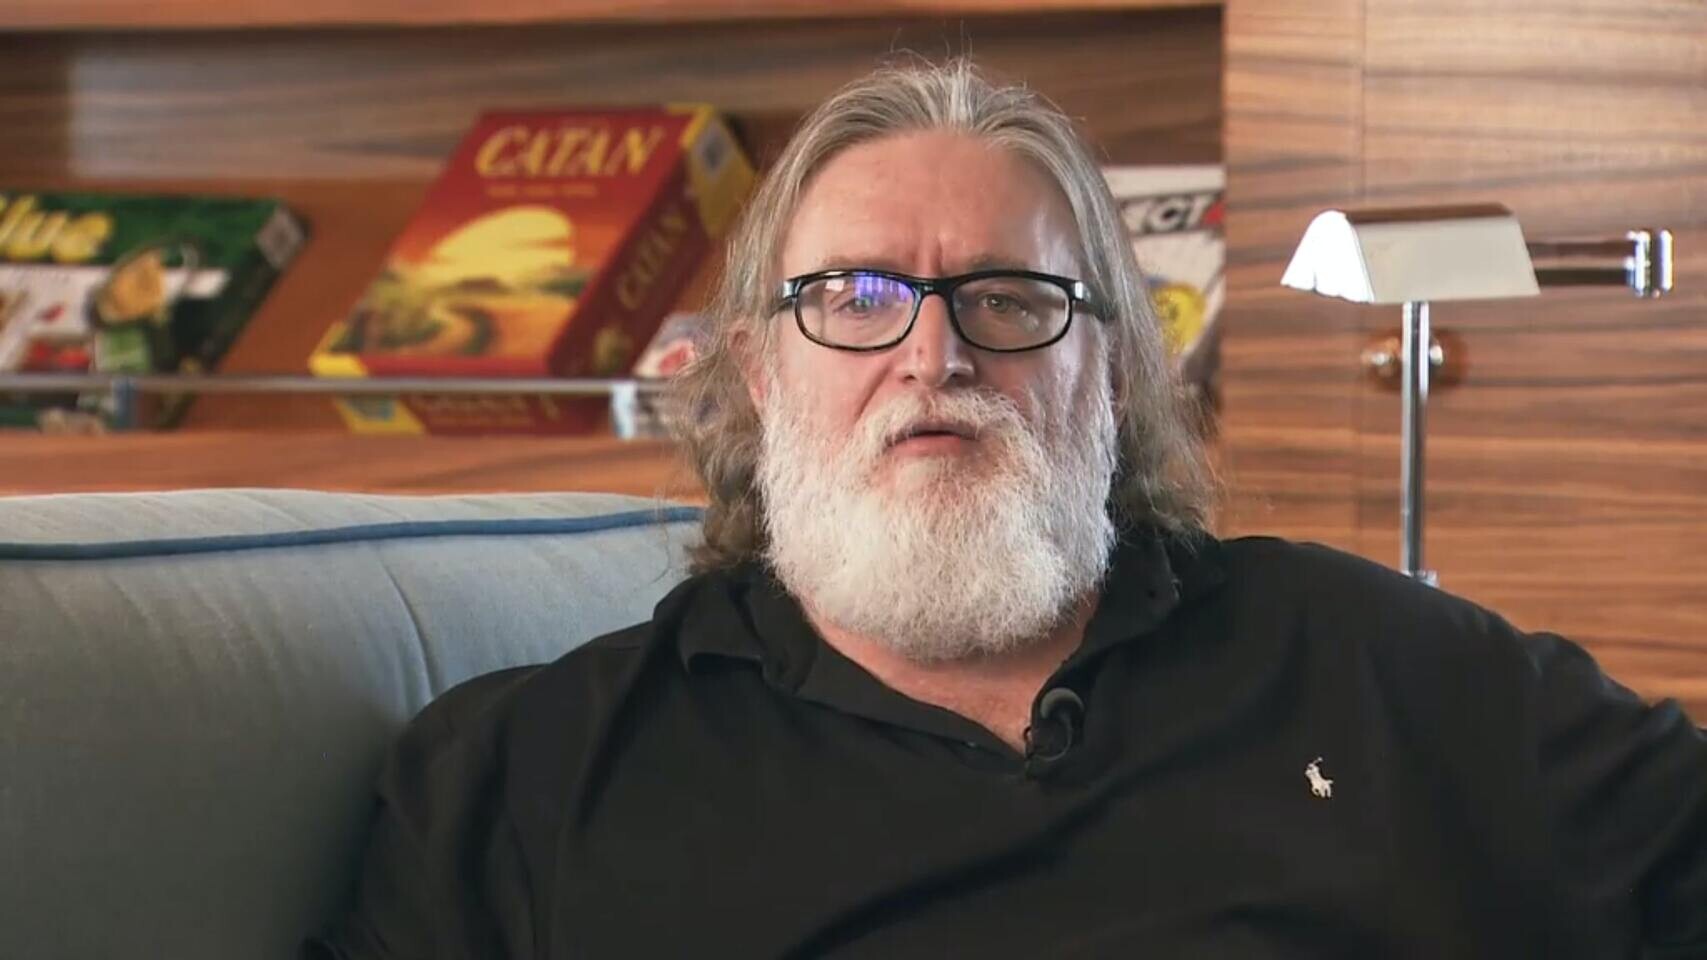 Gabe Newell says Valve has 'games in development that we're going to be  announcing